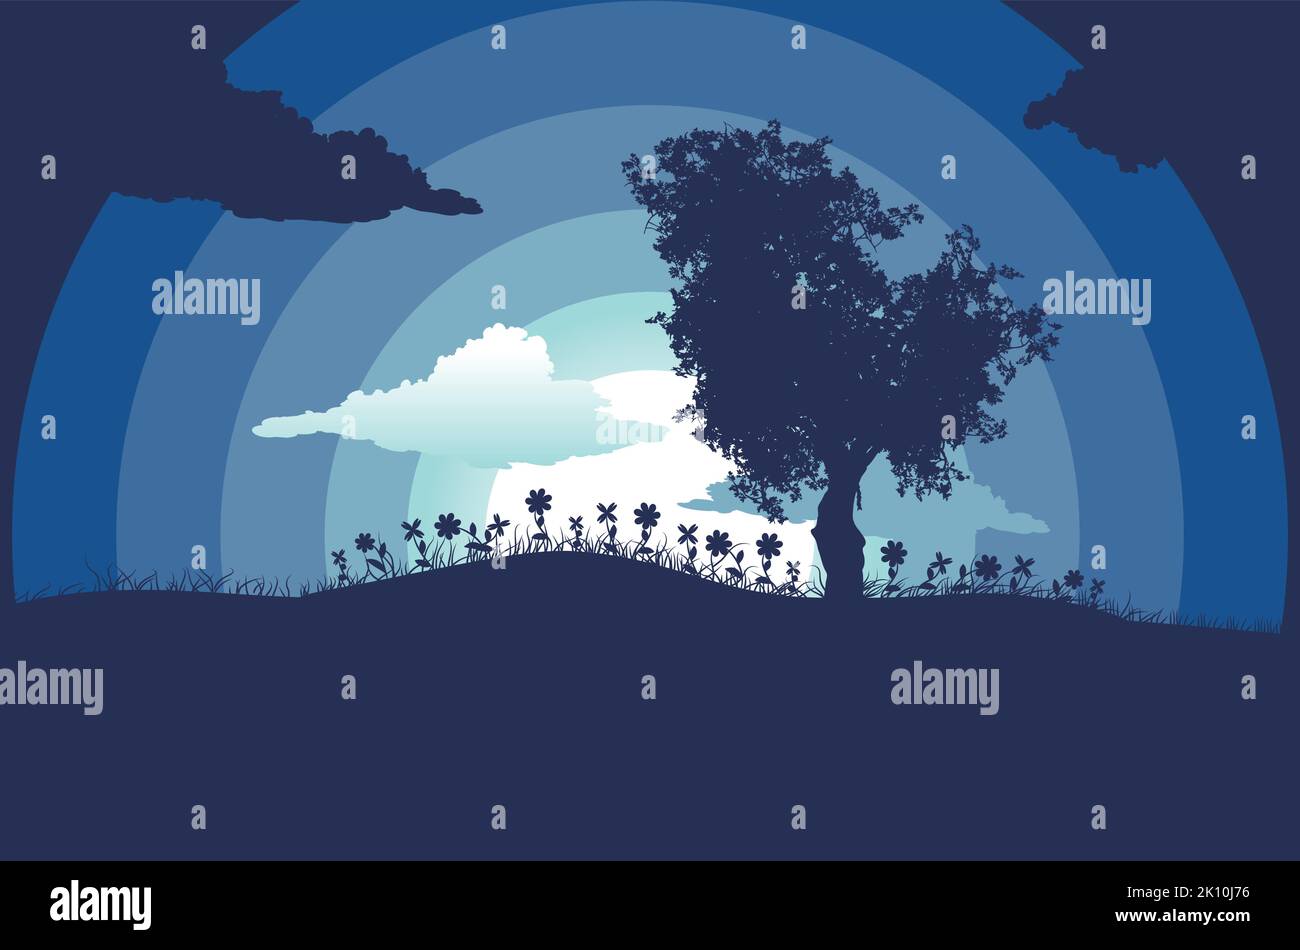 Dark night landscape with tree and grass silhouette illustration. Stock Vector